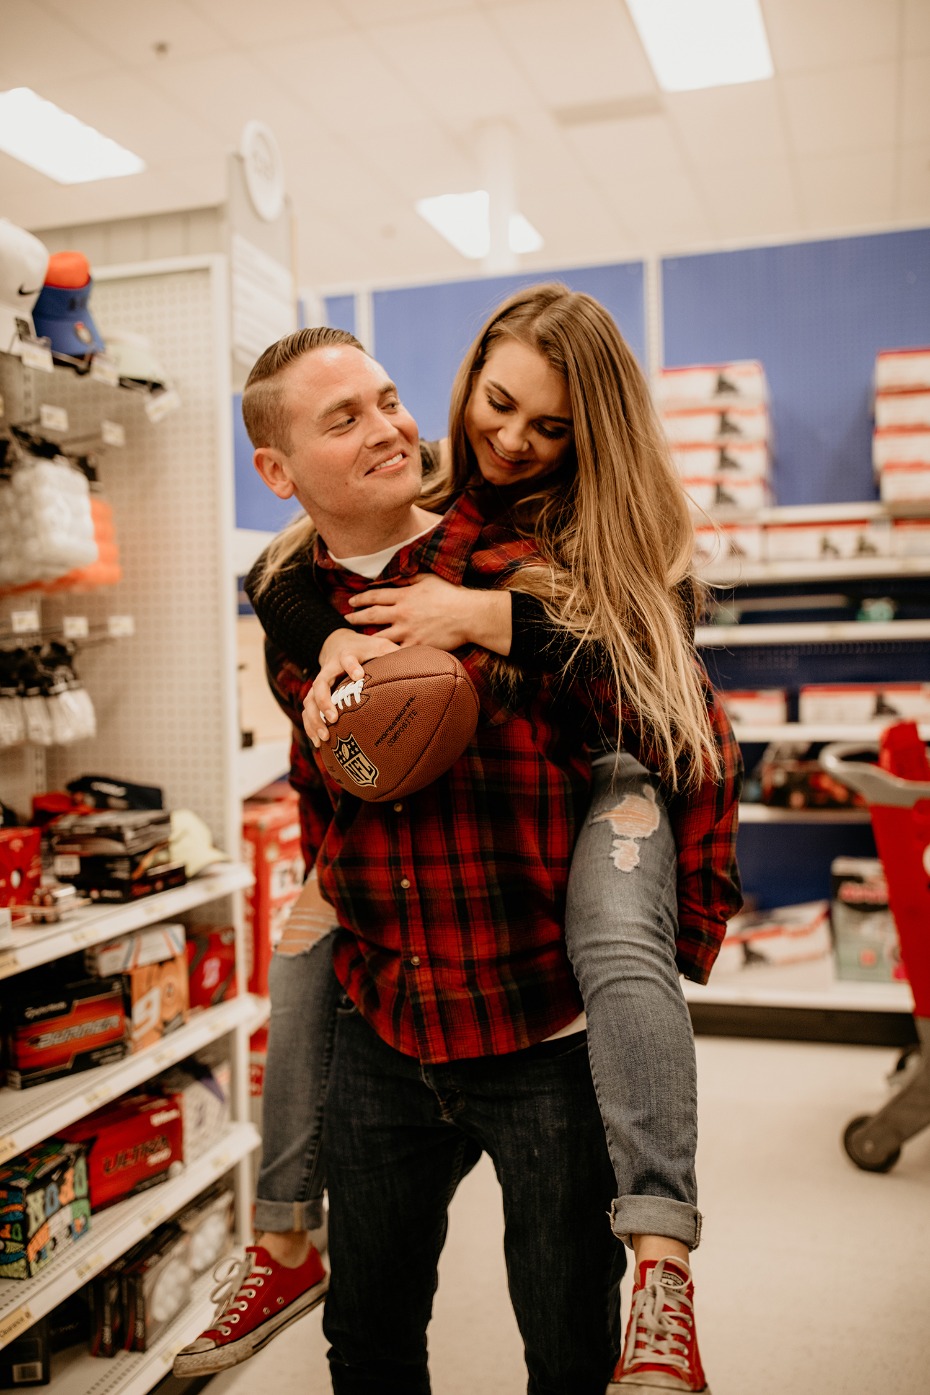 Late night engagement shoot in Target